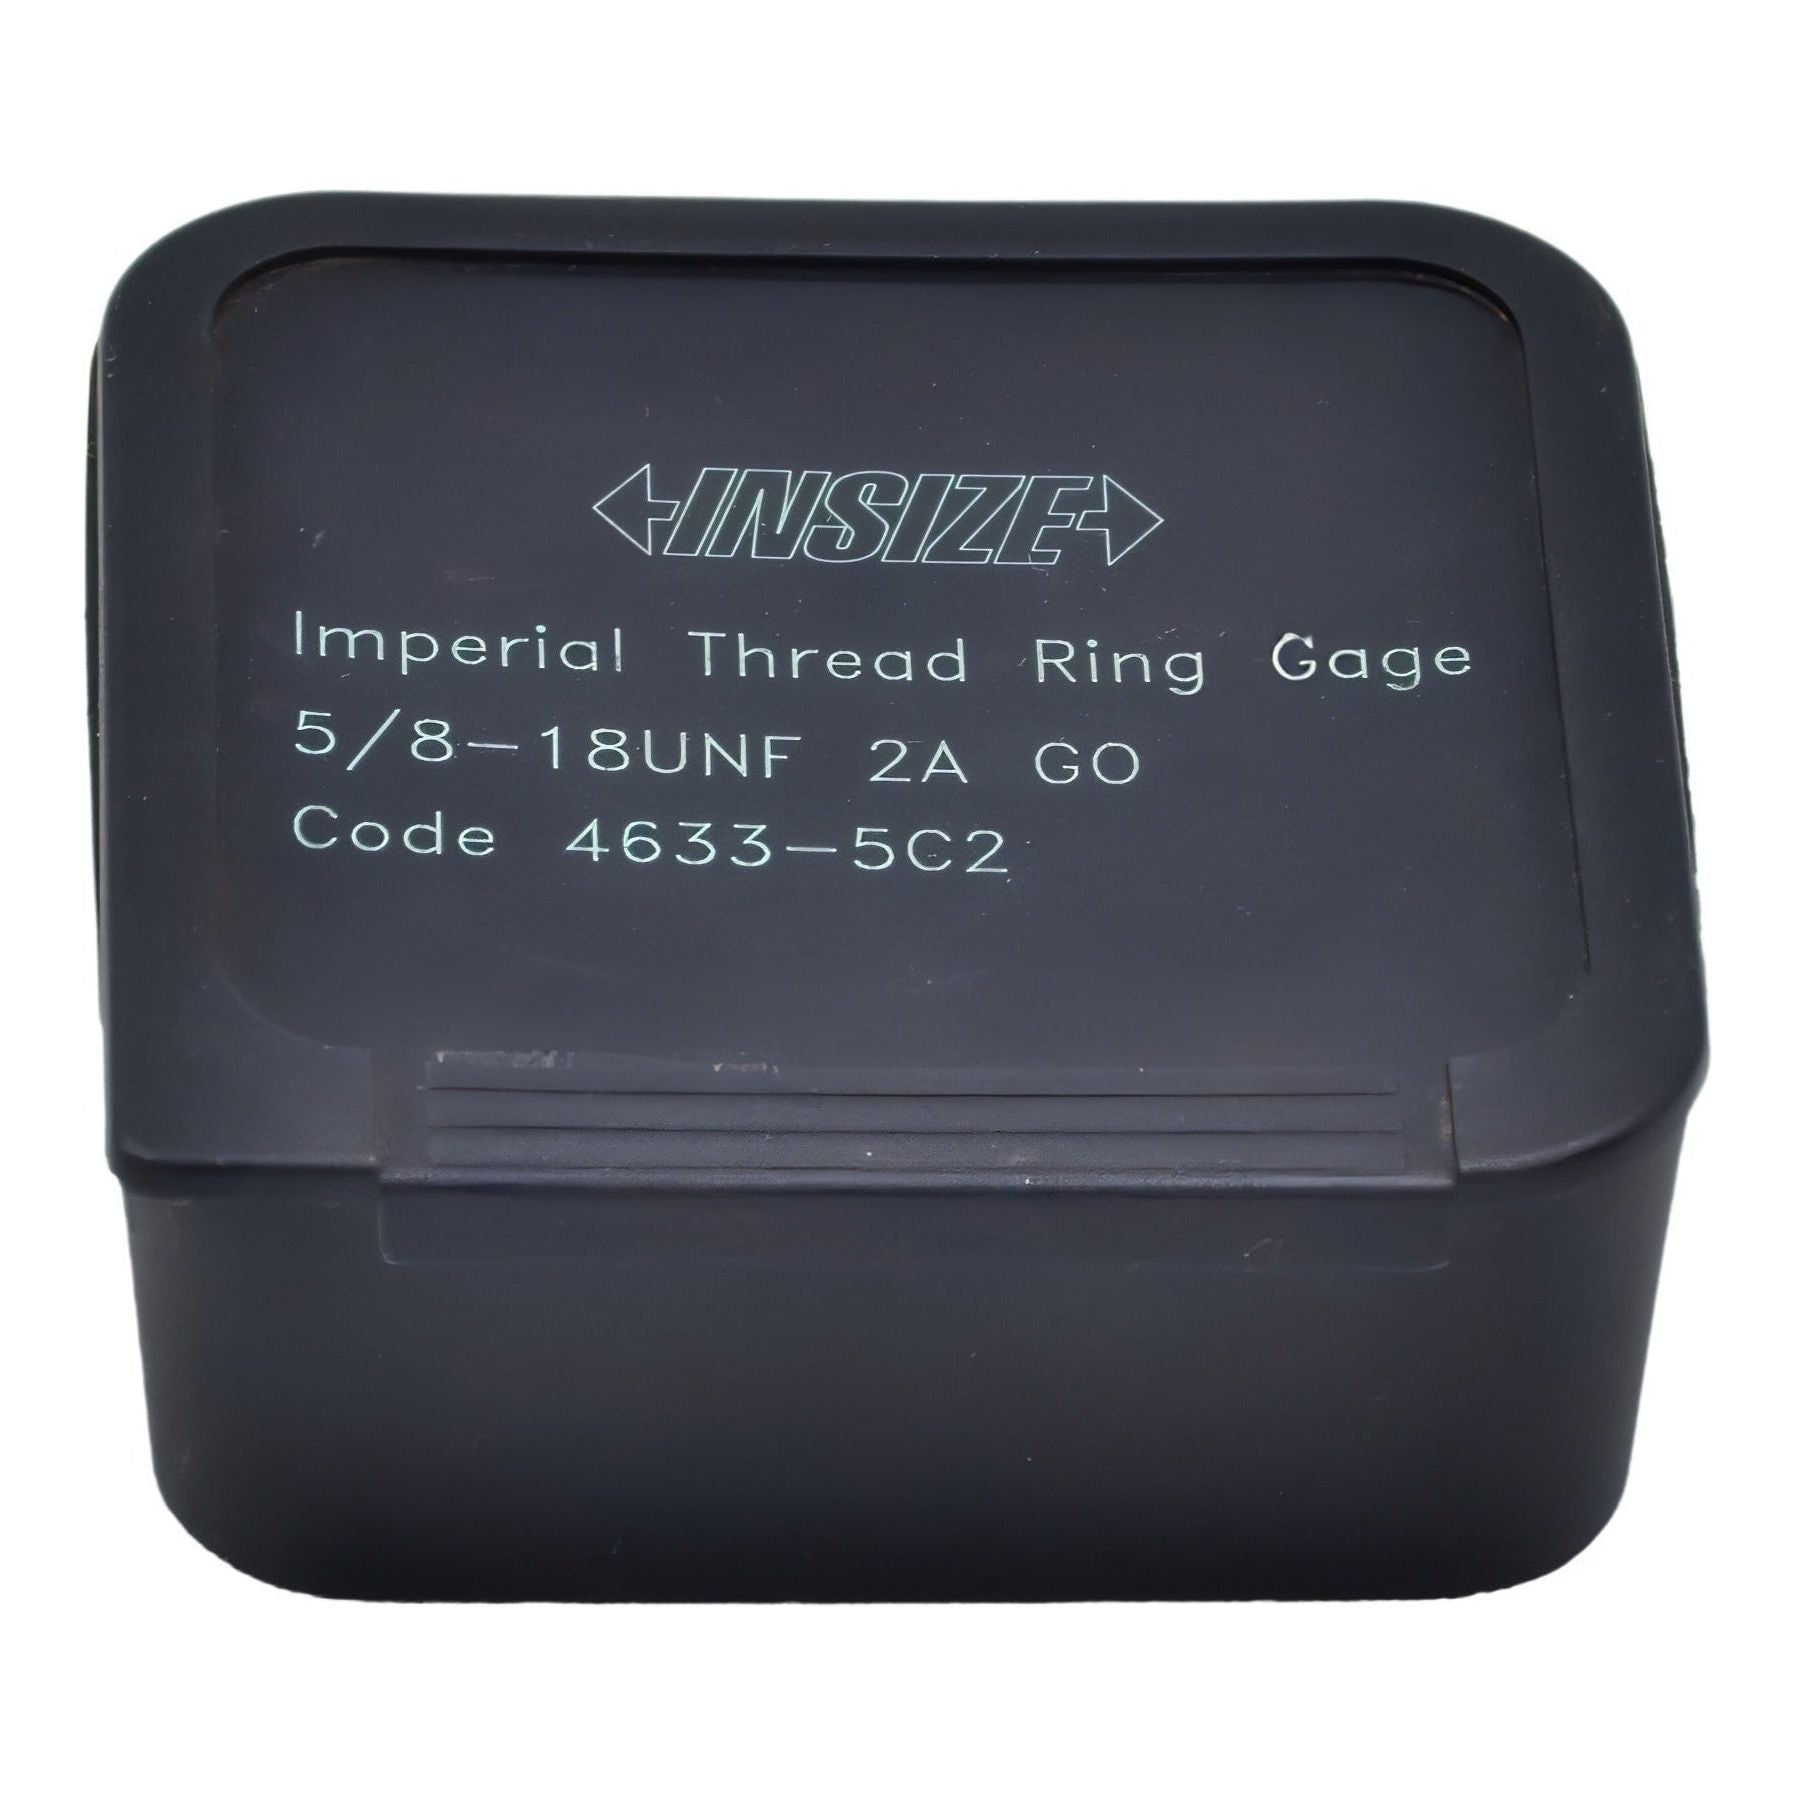 Insize Imperial Thread Ring Gauge 5/8-18UNF Series 4633-5C2